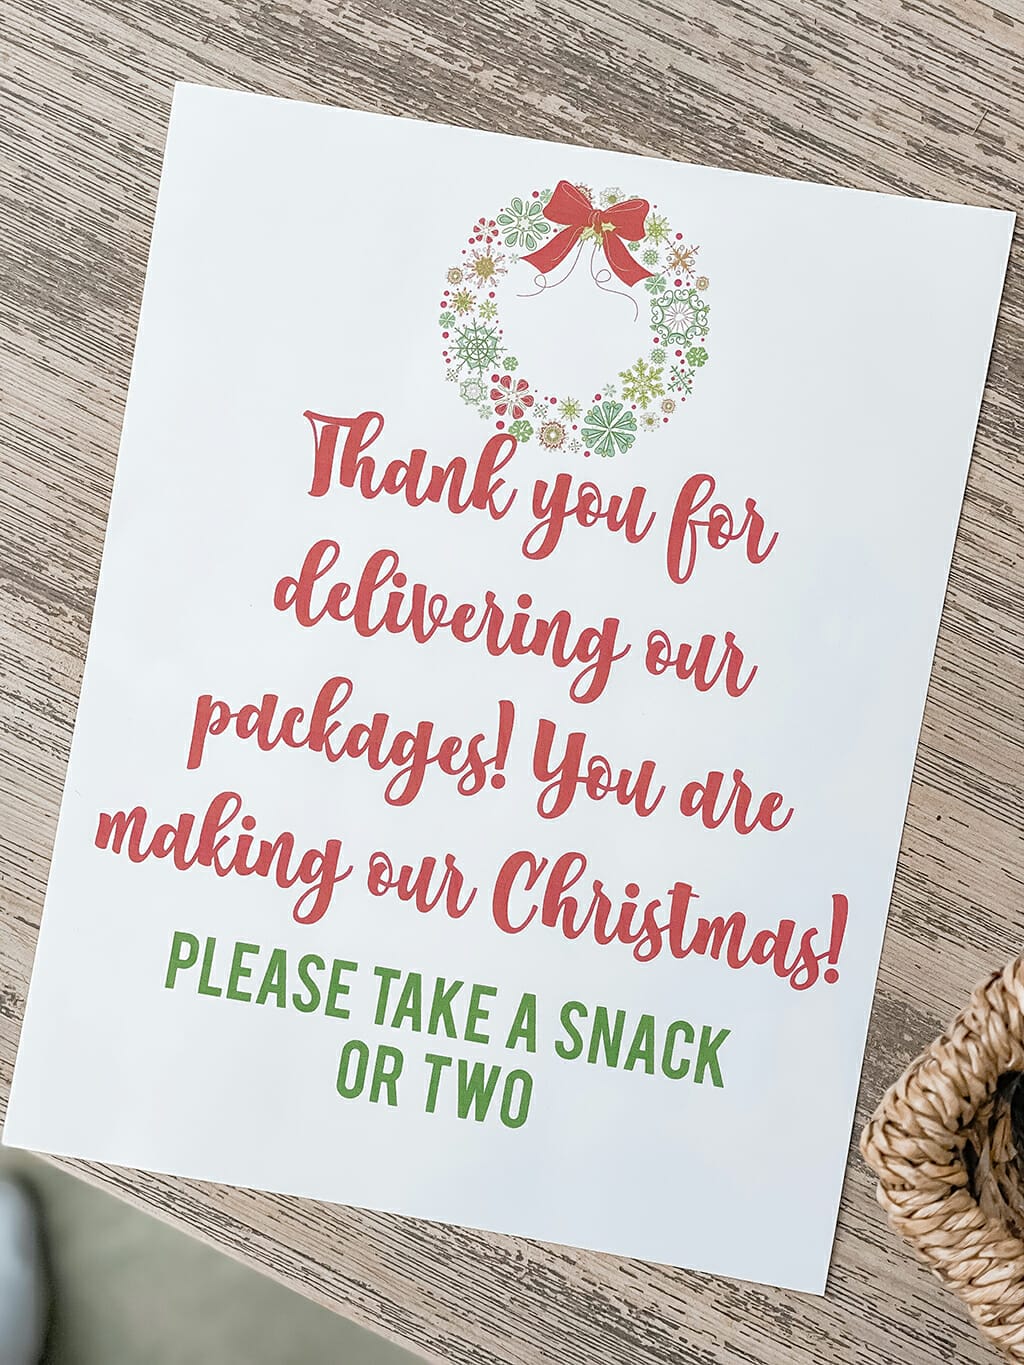 Delivery Driver Thank You Holiday Sign on wooden background